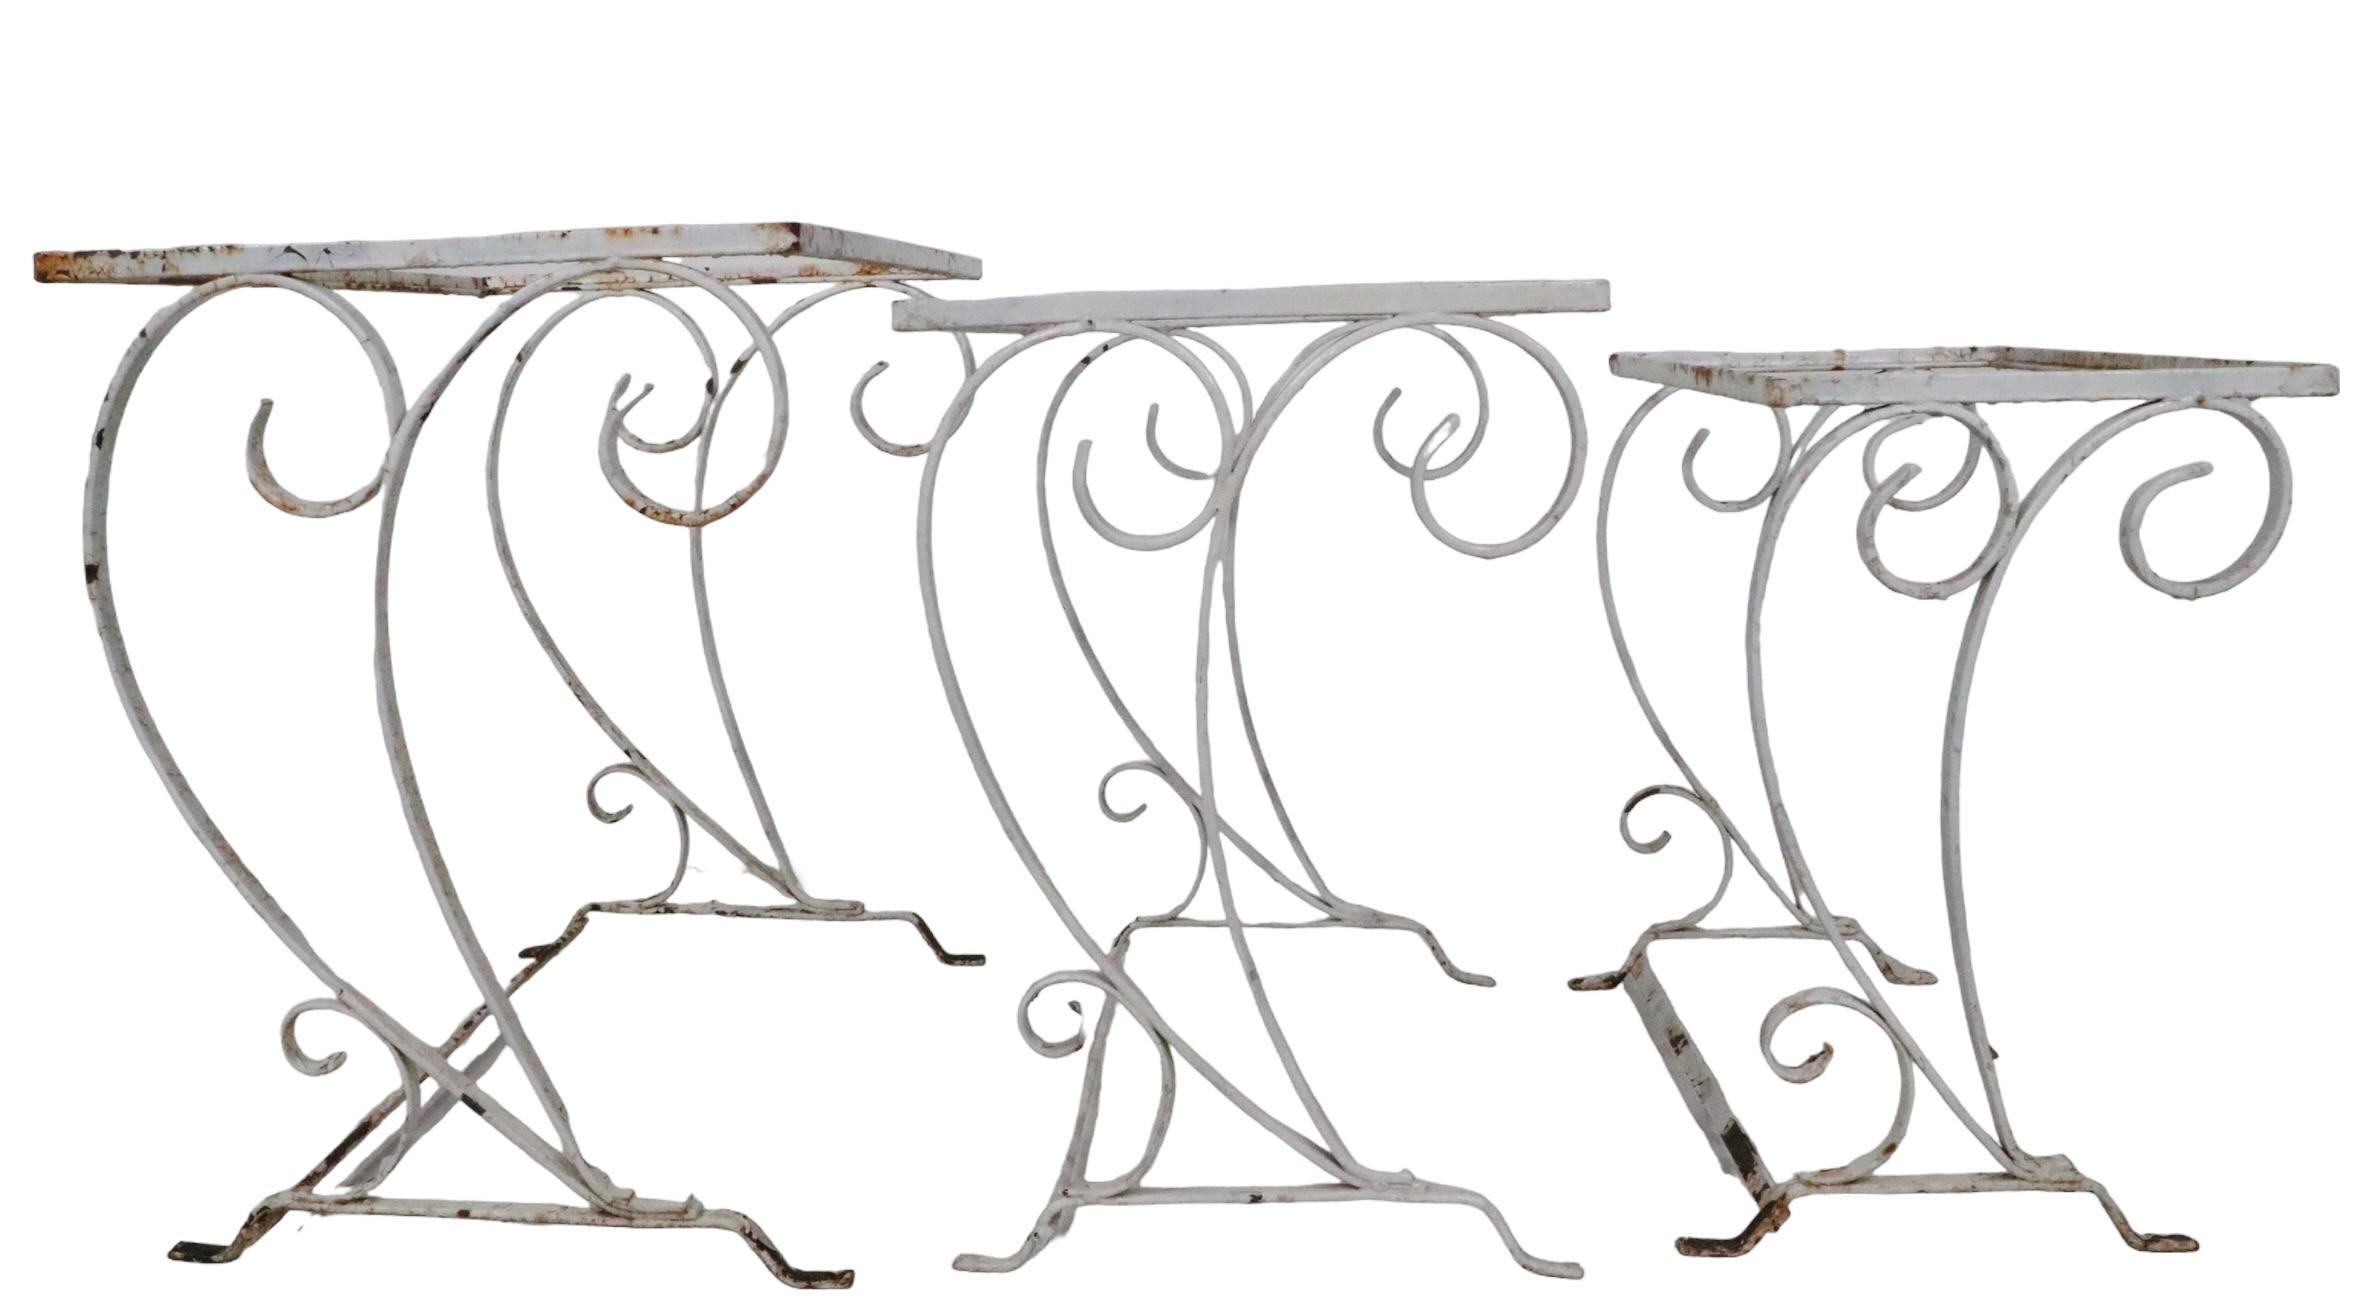 Nest of 3 Art Deco Mid Century Wrought Iron Patio Garden Tables by Salterini For Sale 1